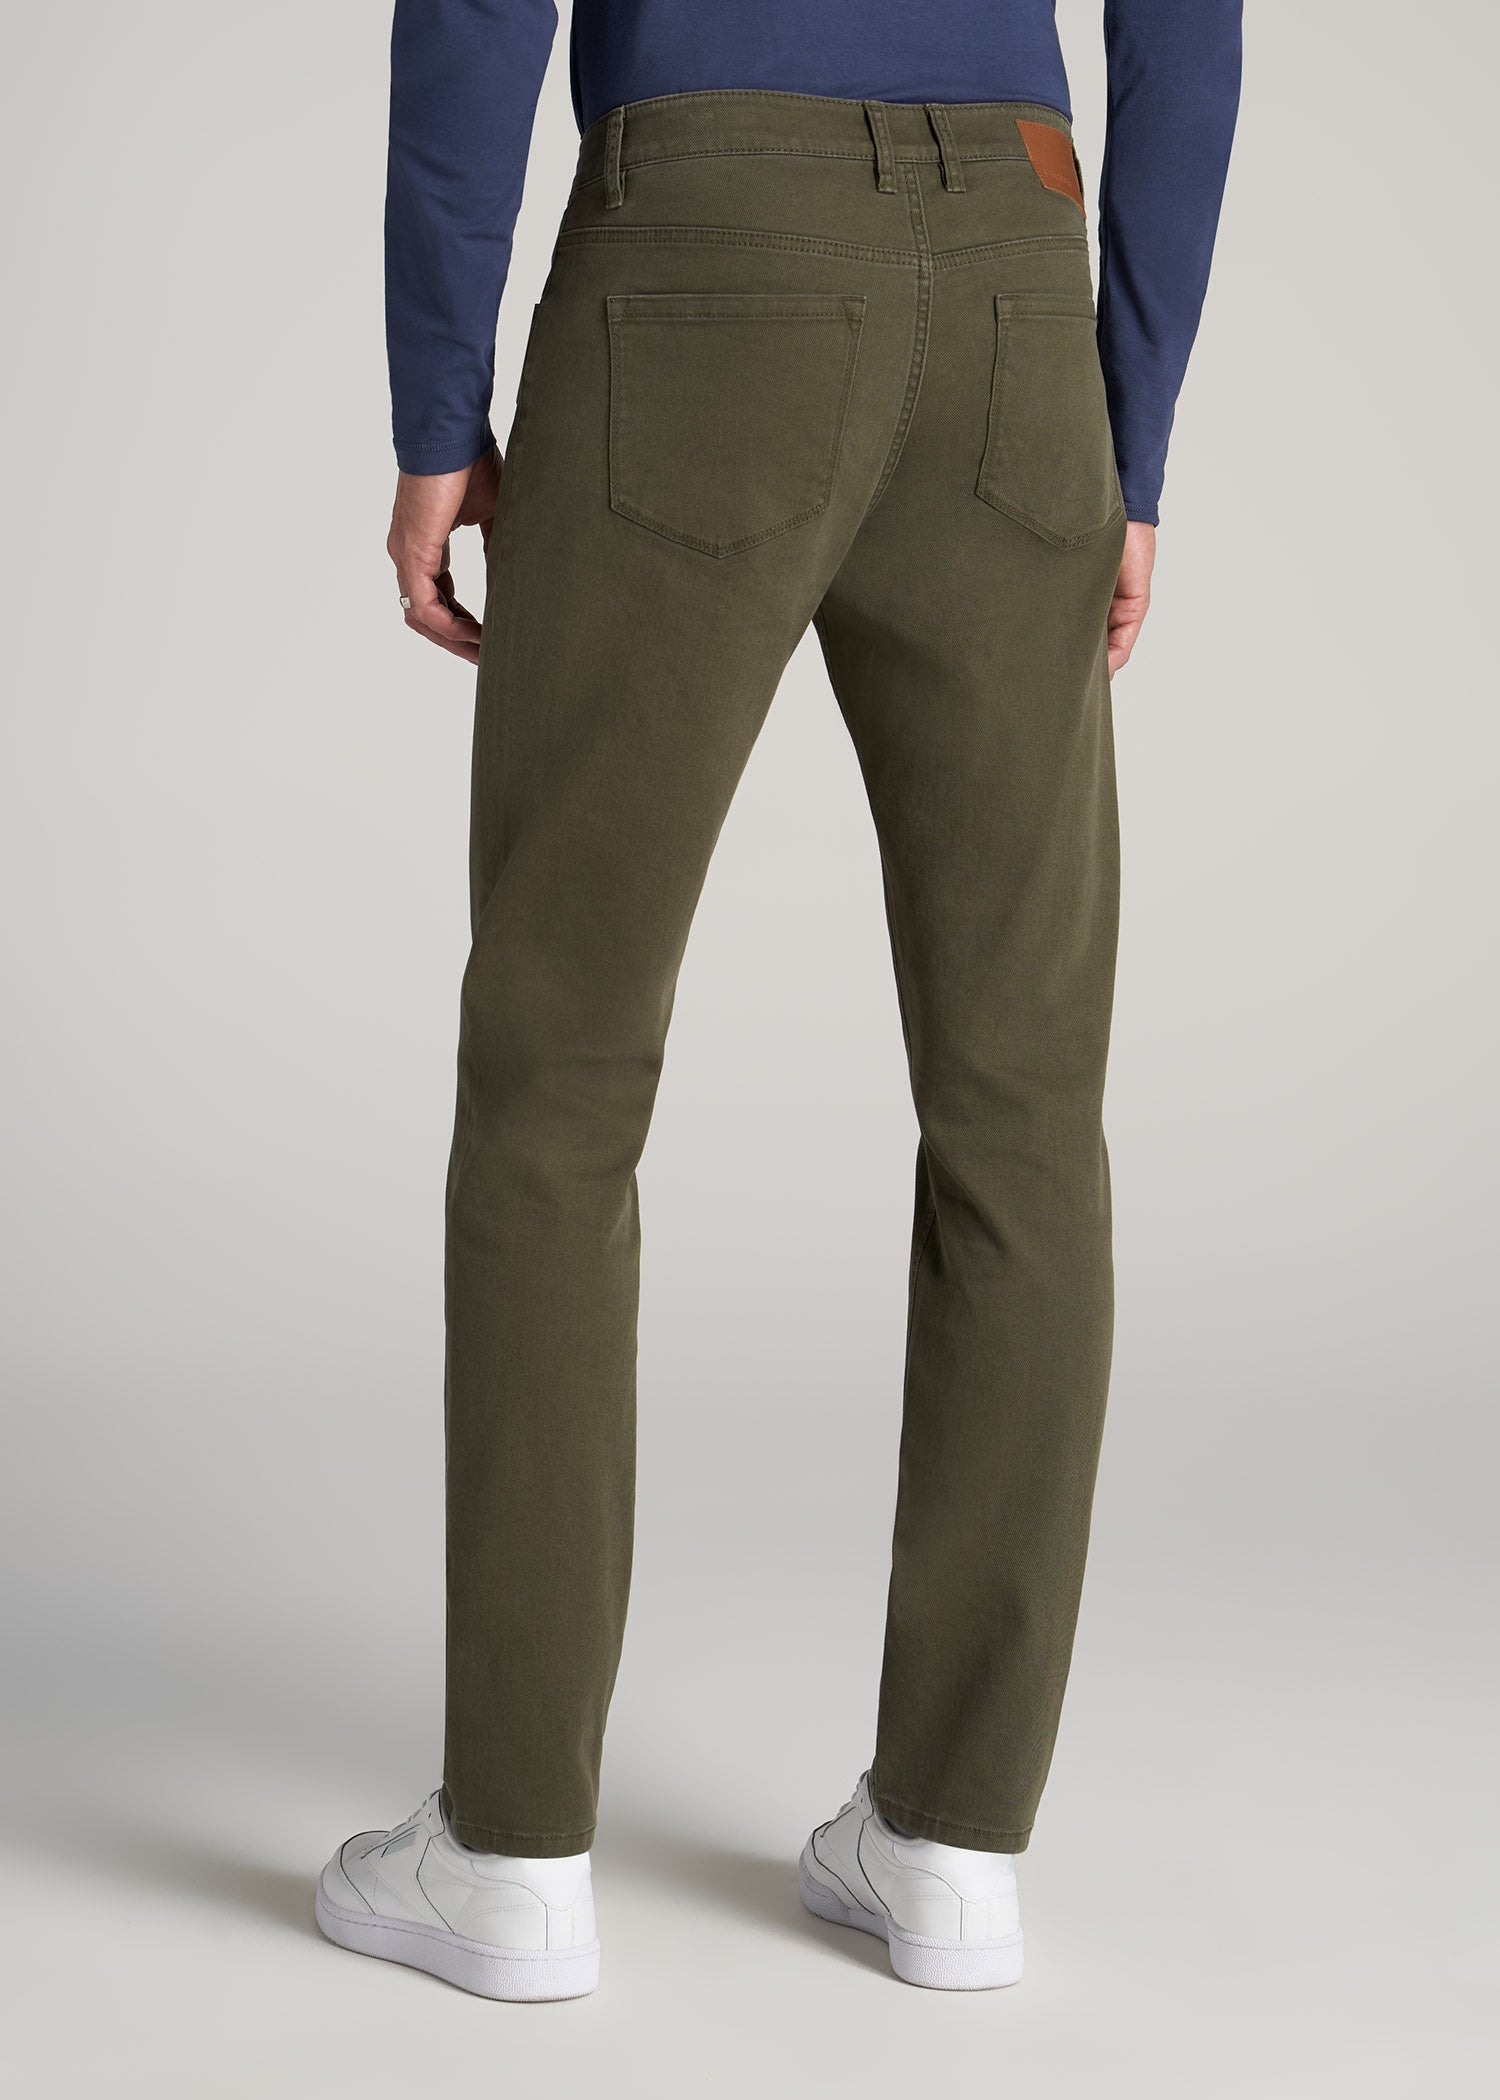     American-Tall-Men-Carman-Tapered-Fit-Jeans-Olive-Green-Wash-back